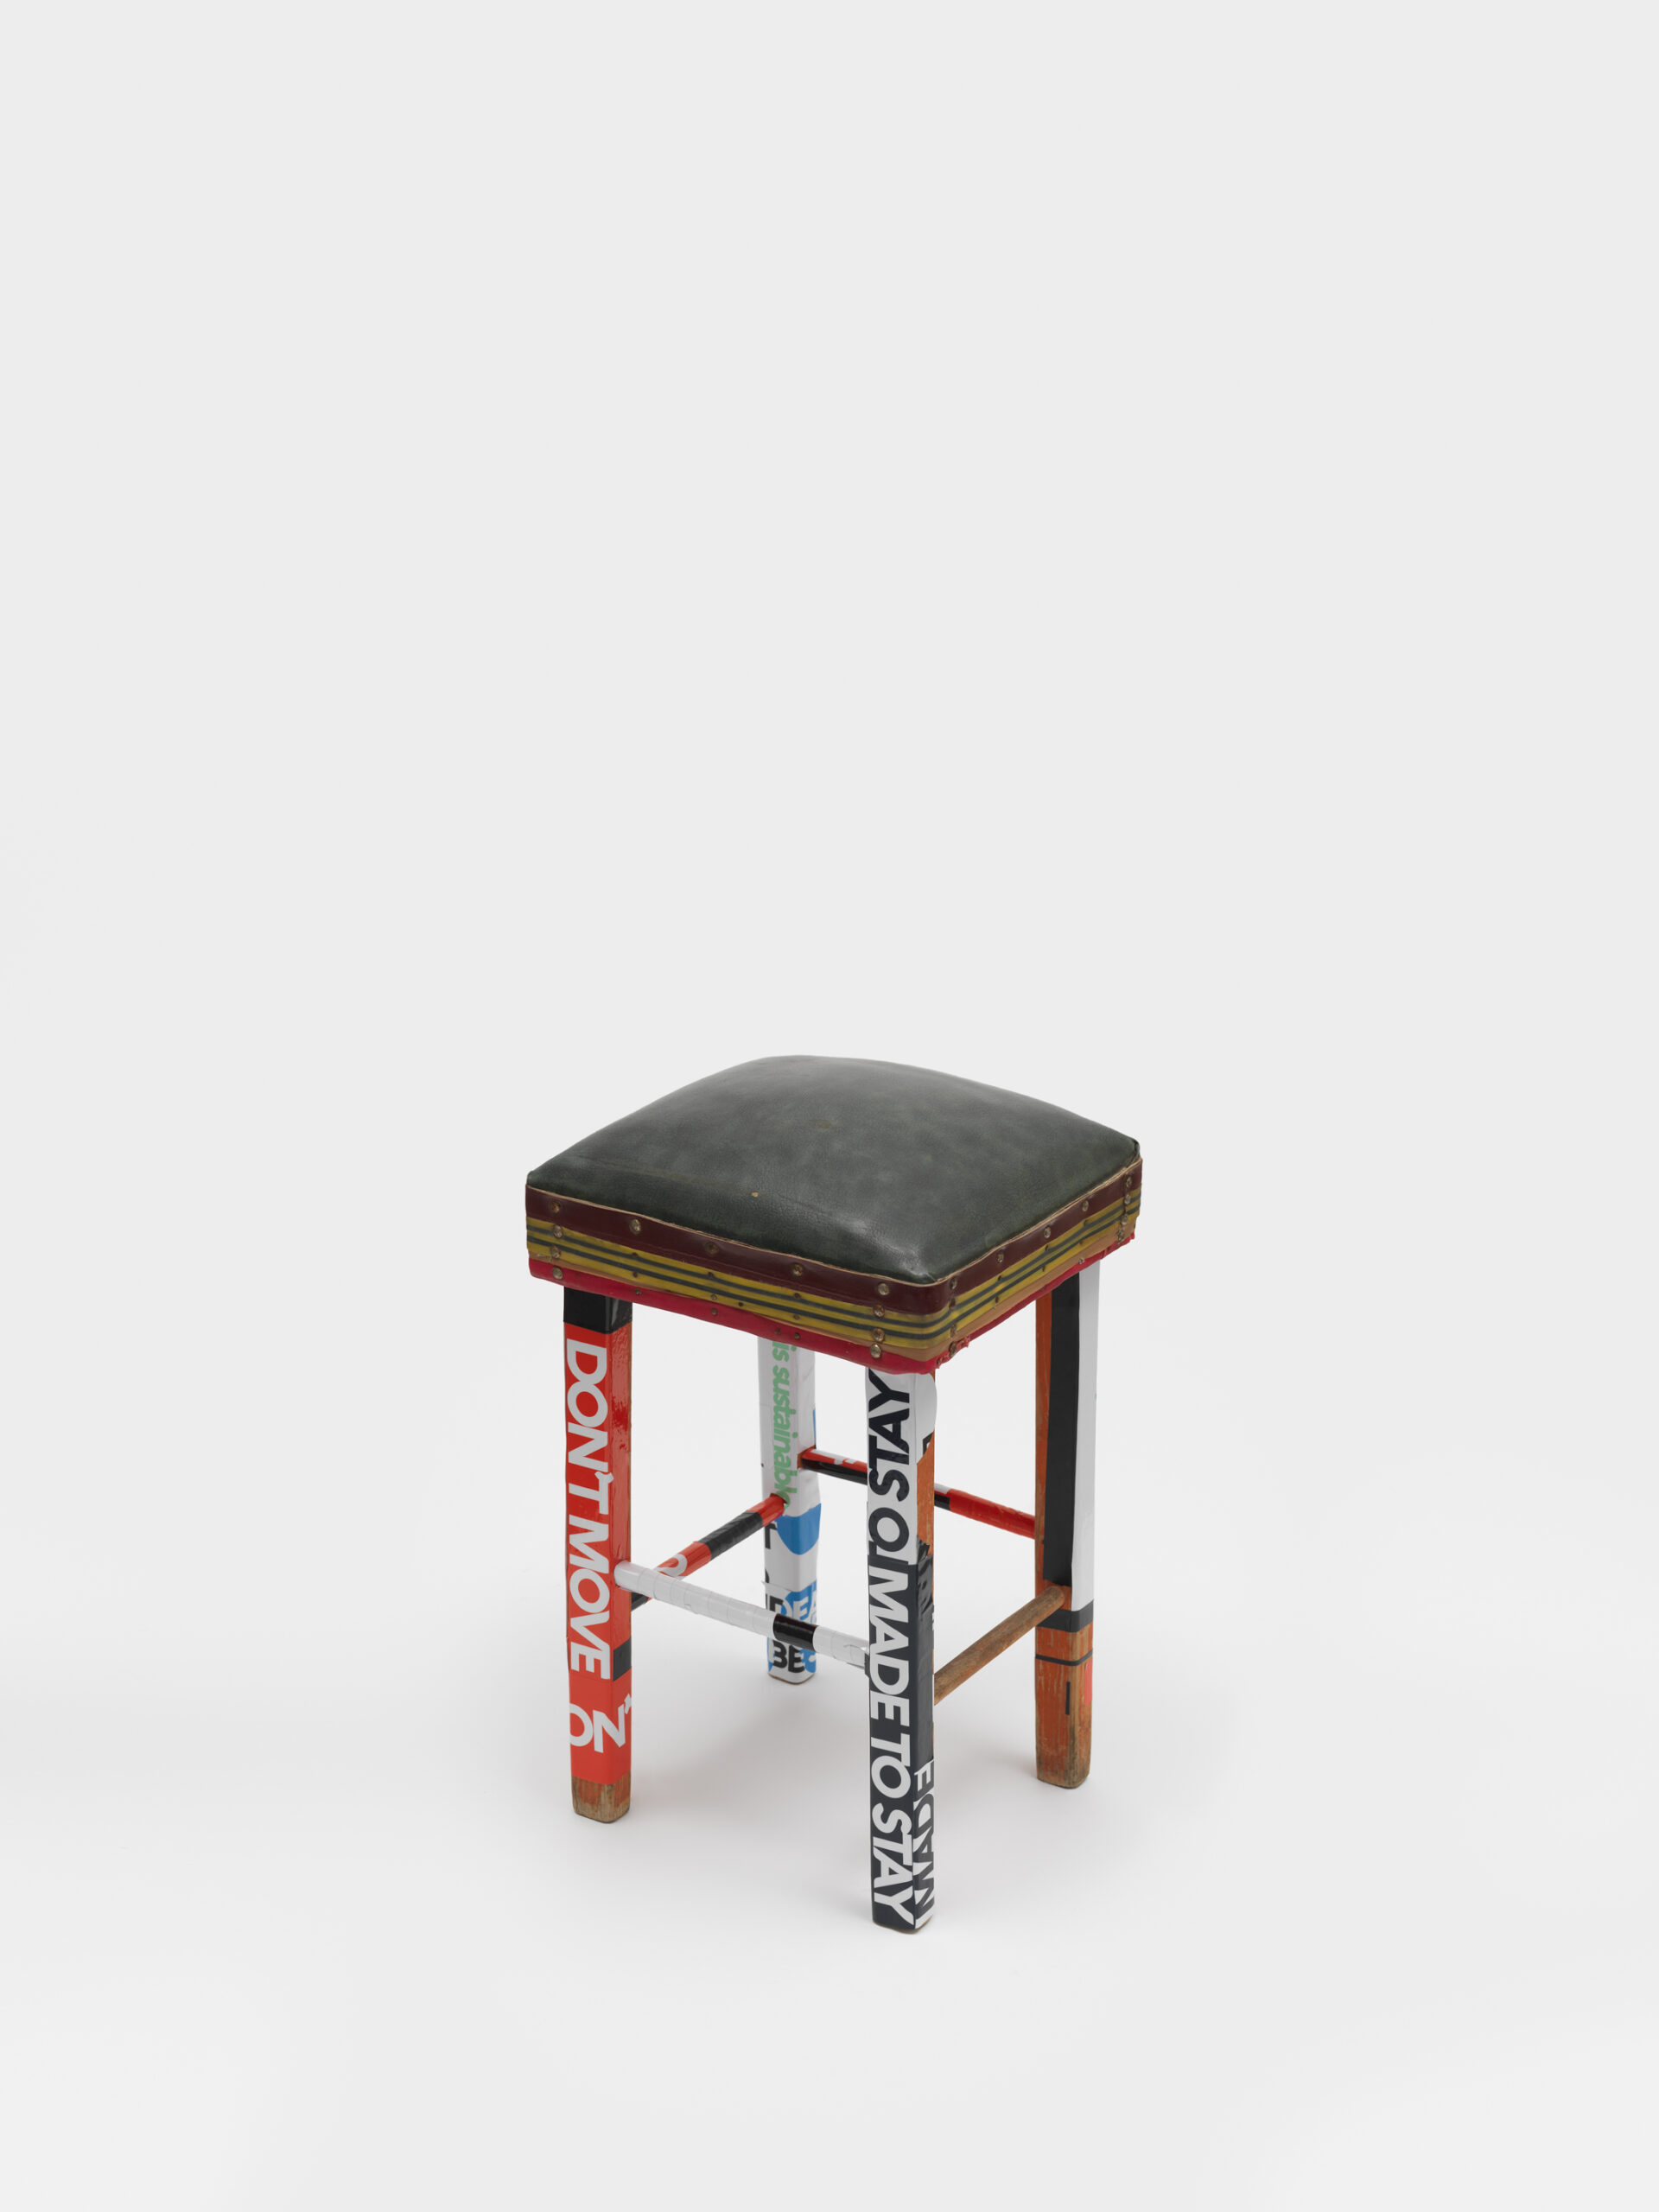 Product image: Cushion Stool, modified by Evi, claim stickers, 2022 Athens, 4.6 tons